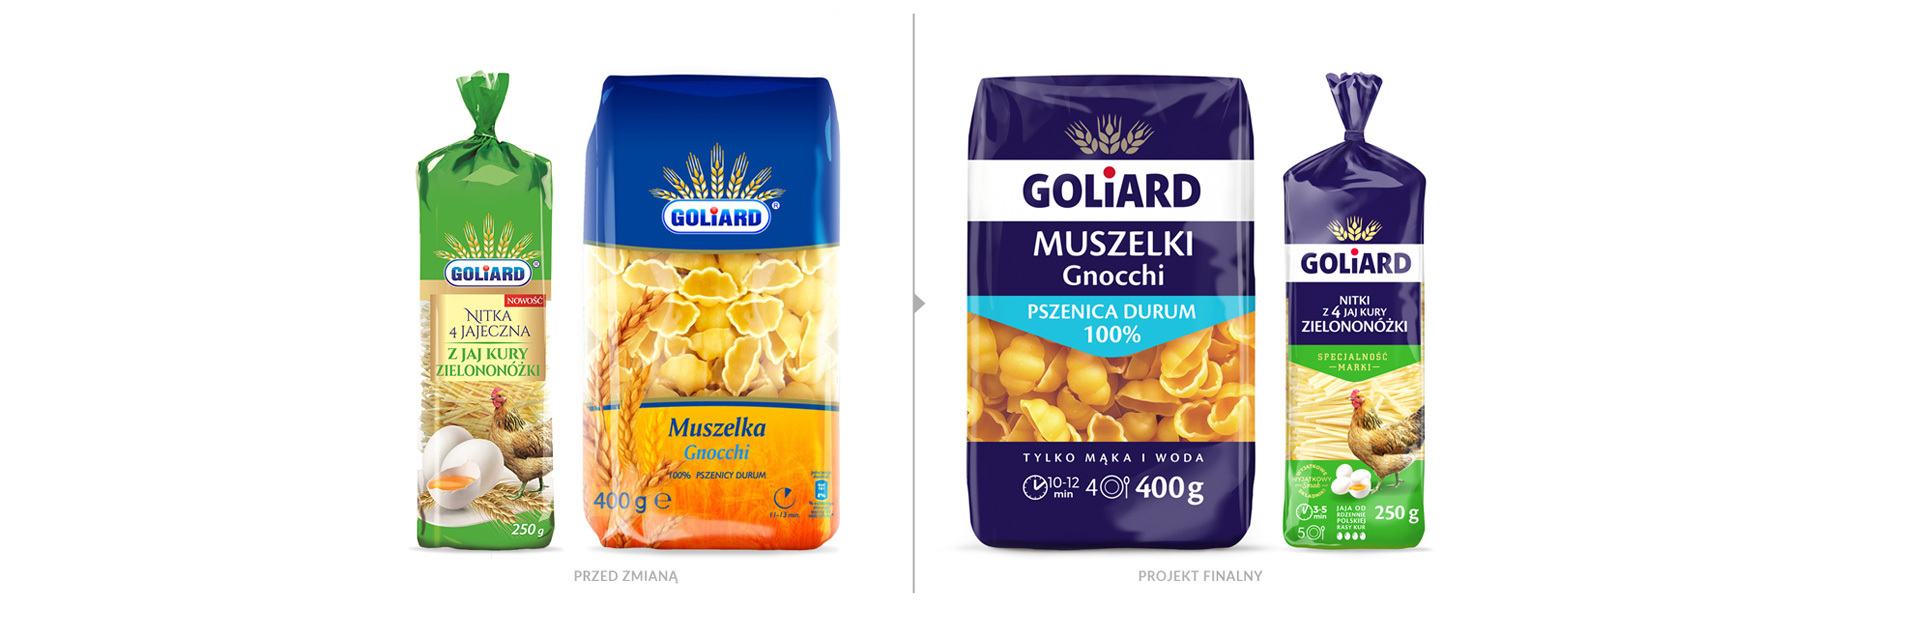 Pasta packaging redesign - before and after.